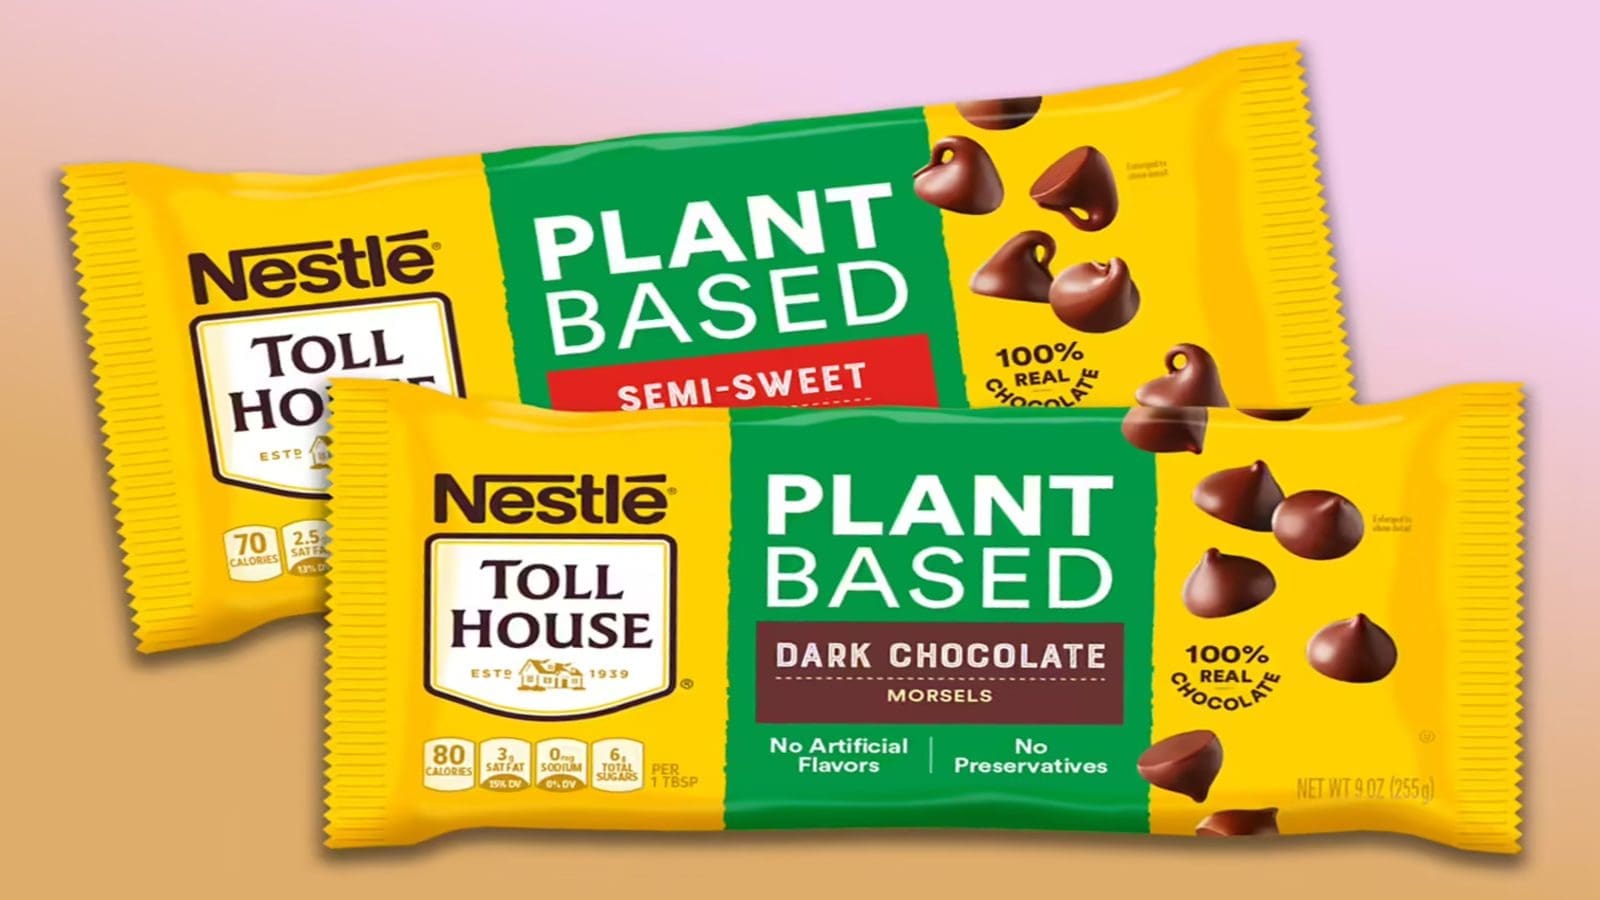 Nestlé Toll House launches two plant-based chocolate flavors for baking